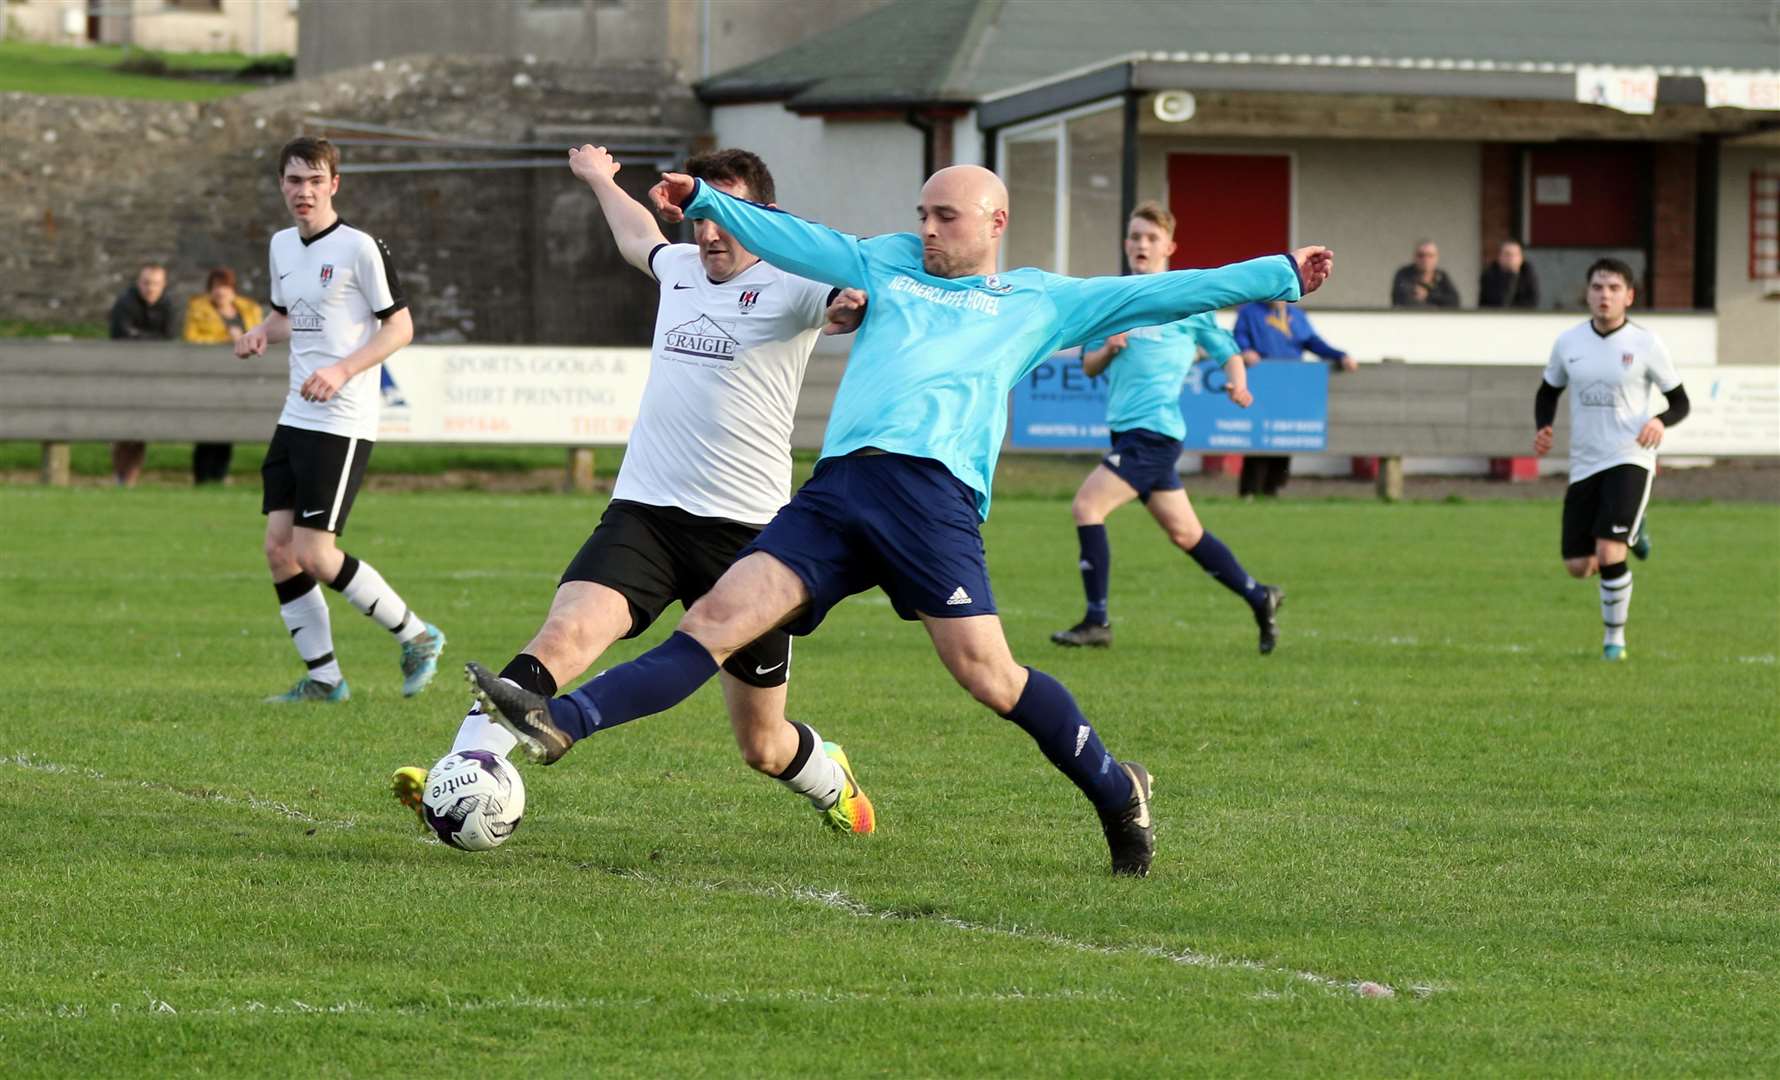 Wick Groats' Sandy Sutherland (right) stretches to win the ball from Thurso Swifts defender Andrew Bremner. Groats inflicted a thumping 9-0 defeat on Swifts. Picture: James Gunn